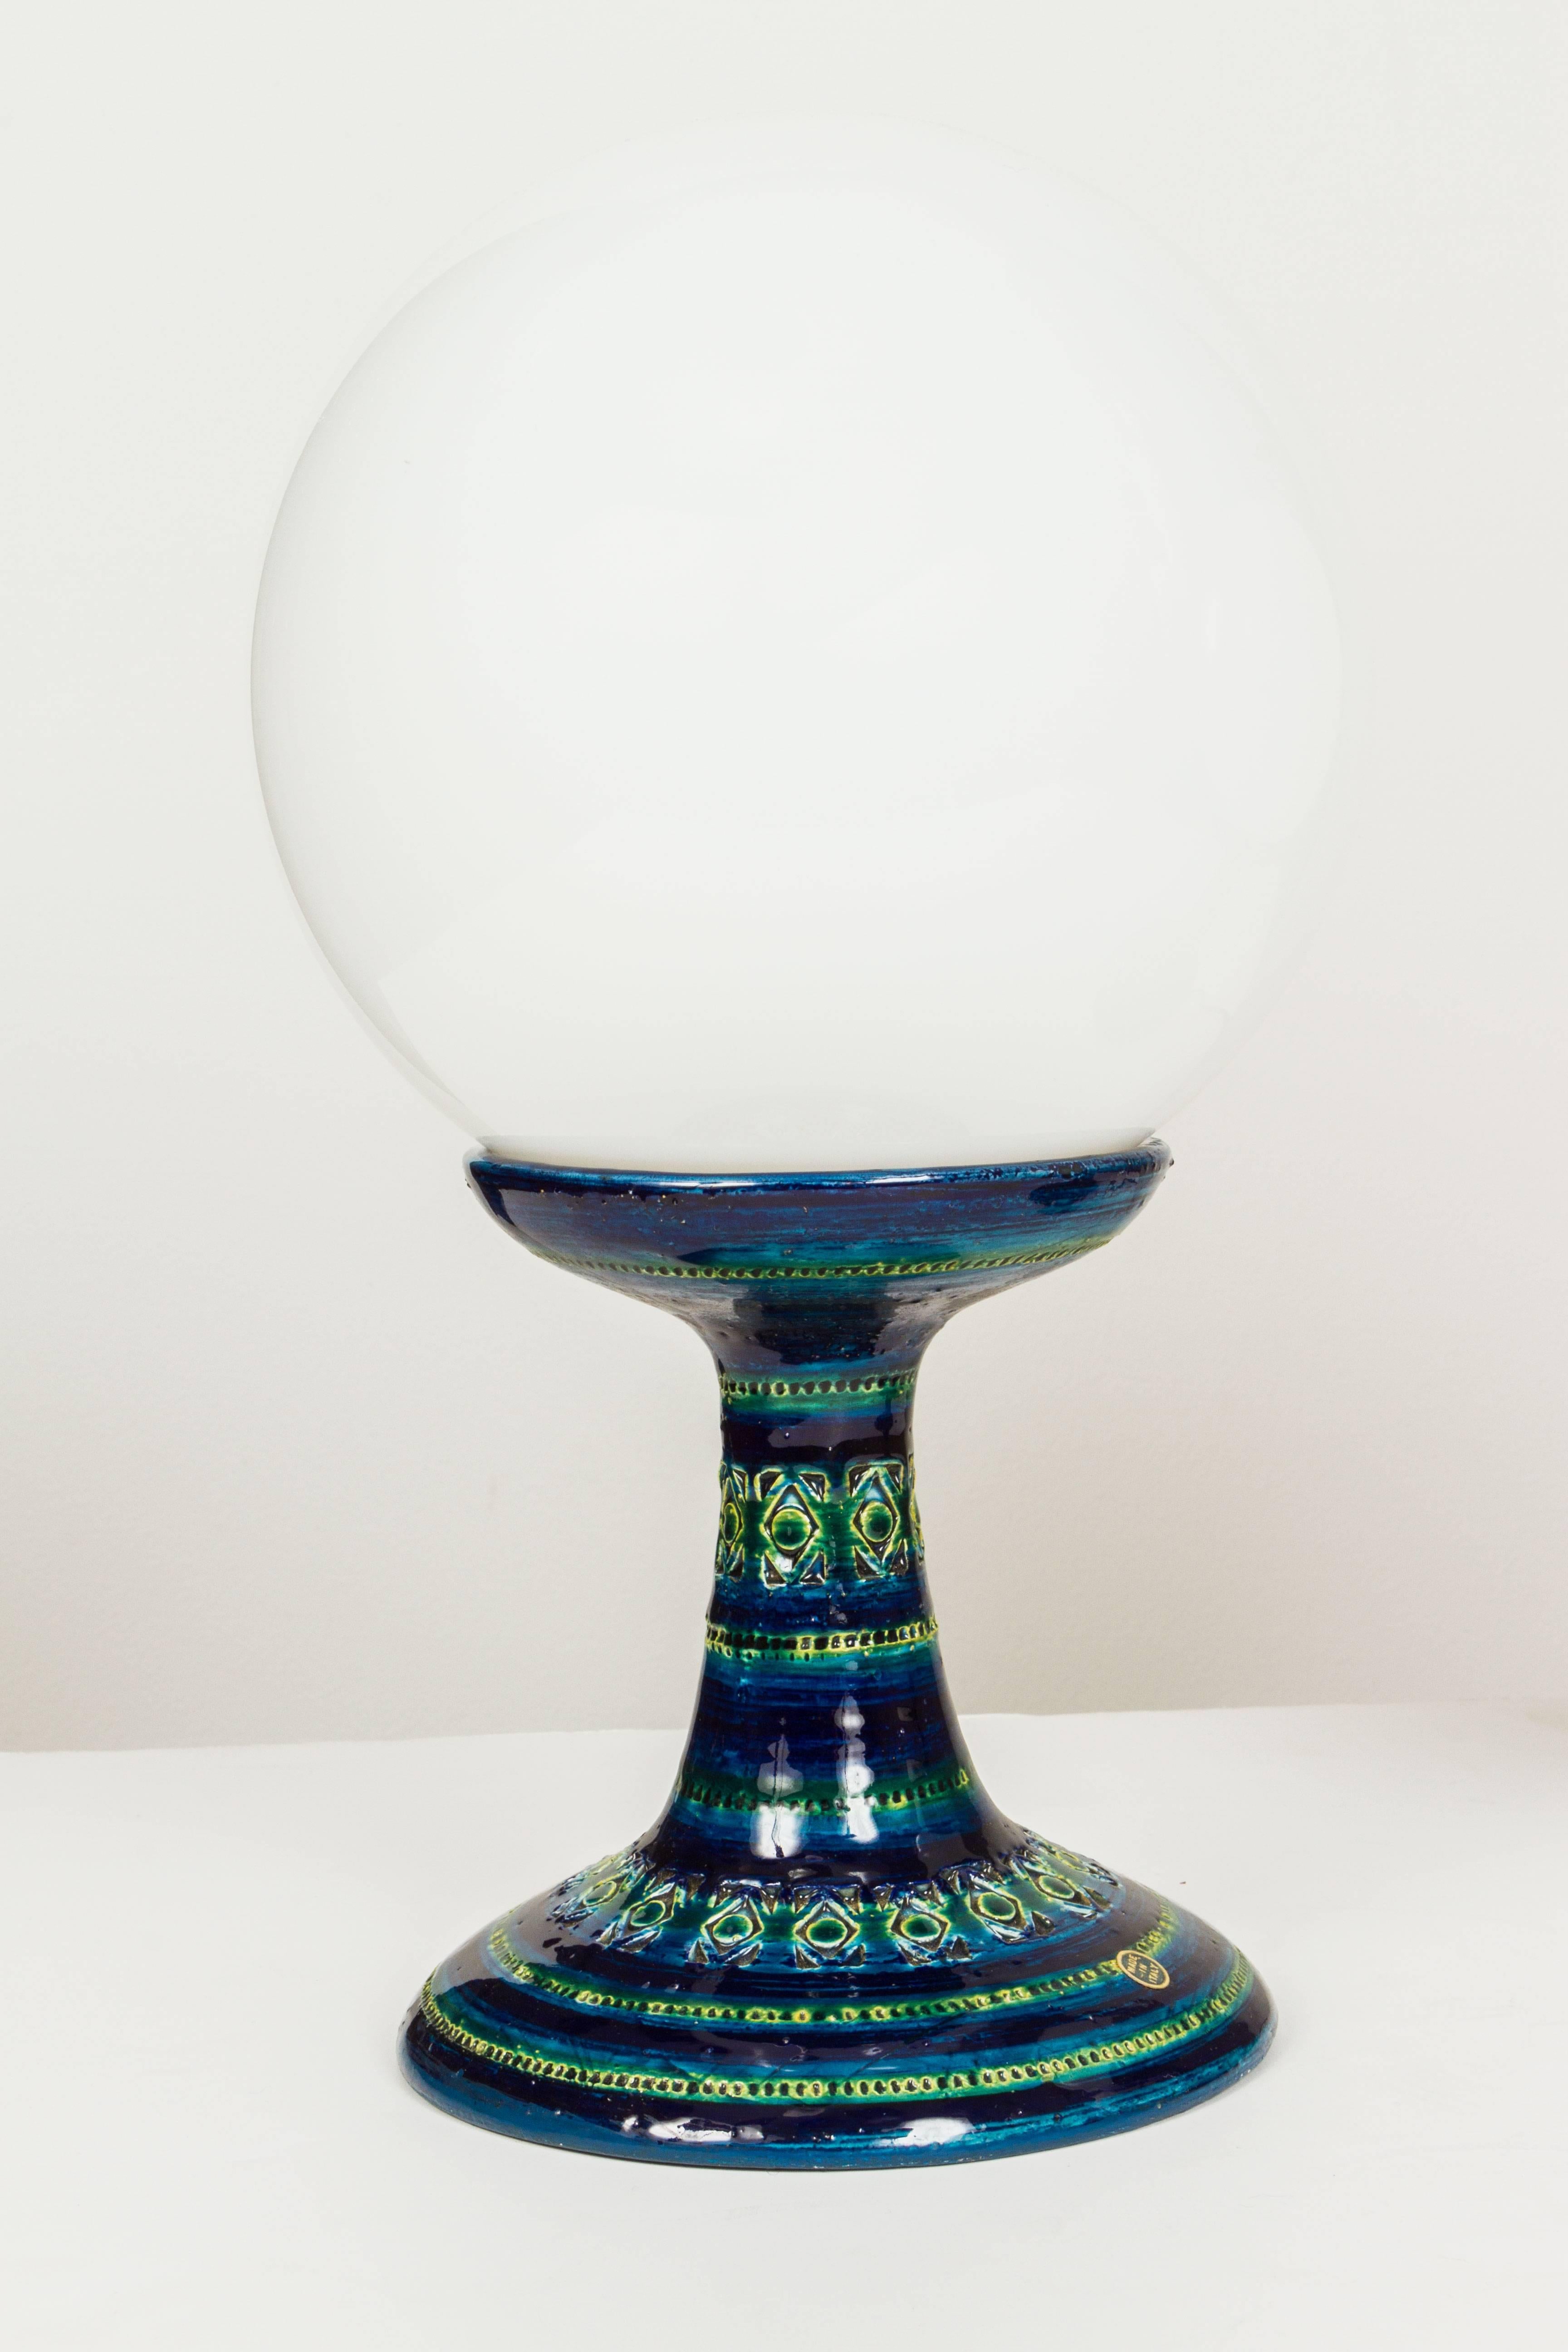 Executed in incised ceramic with blue glaze and opaline glass. Price is for both lamps.